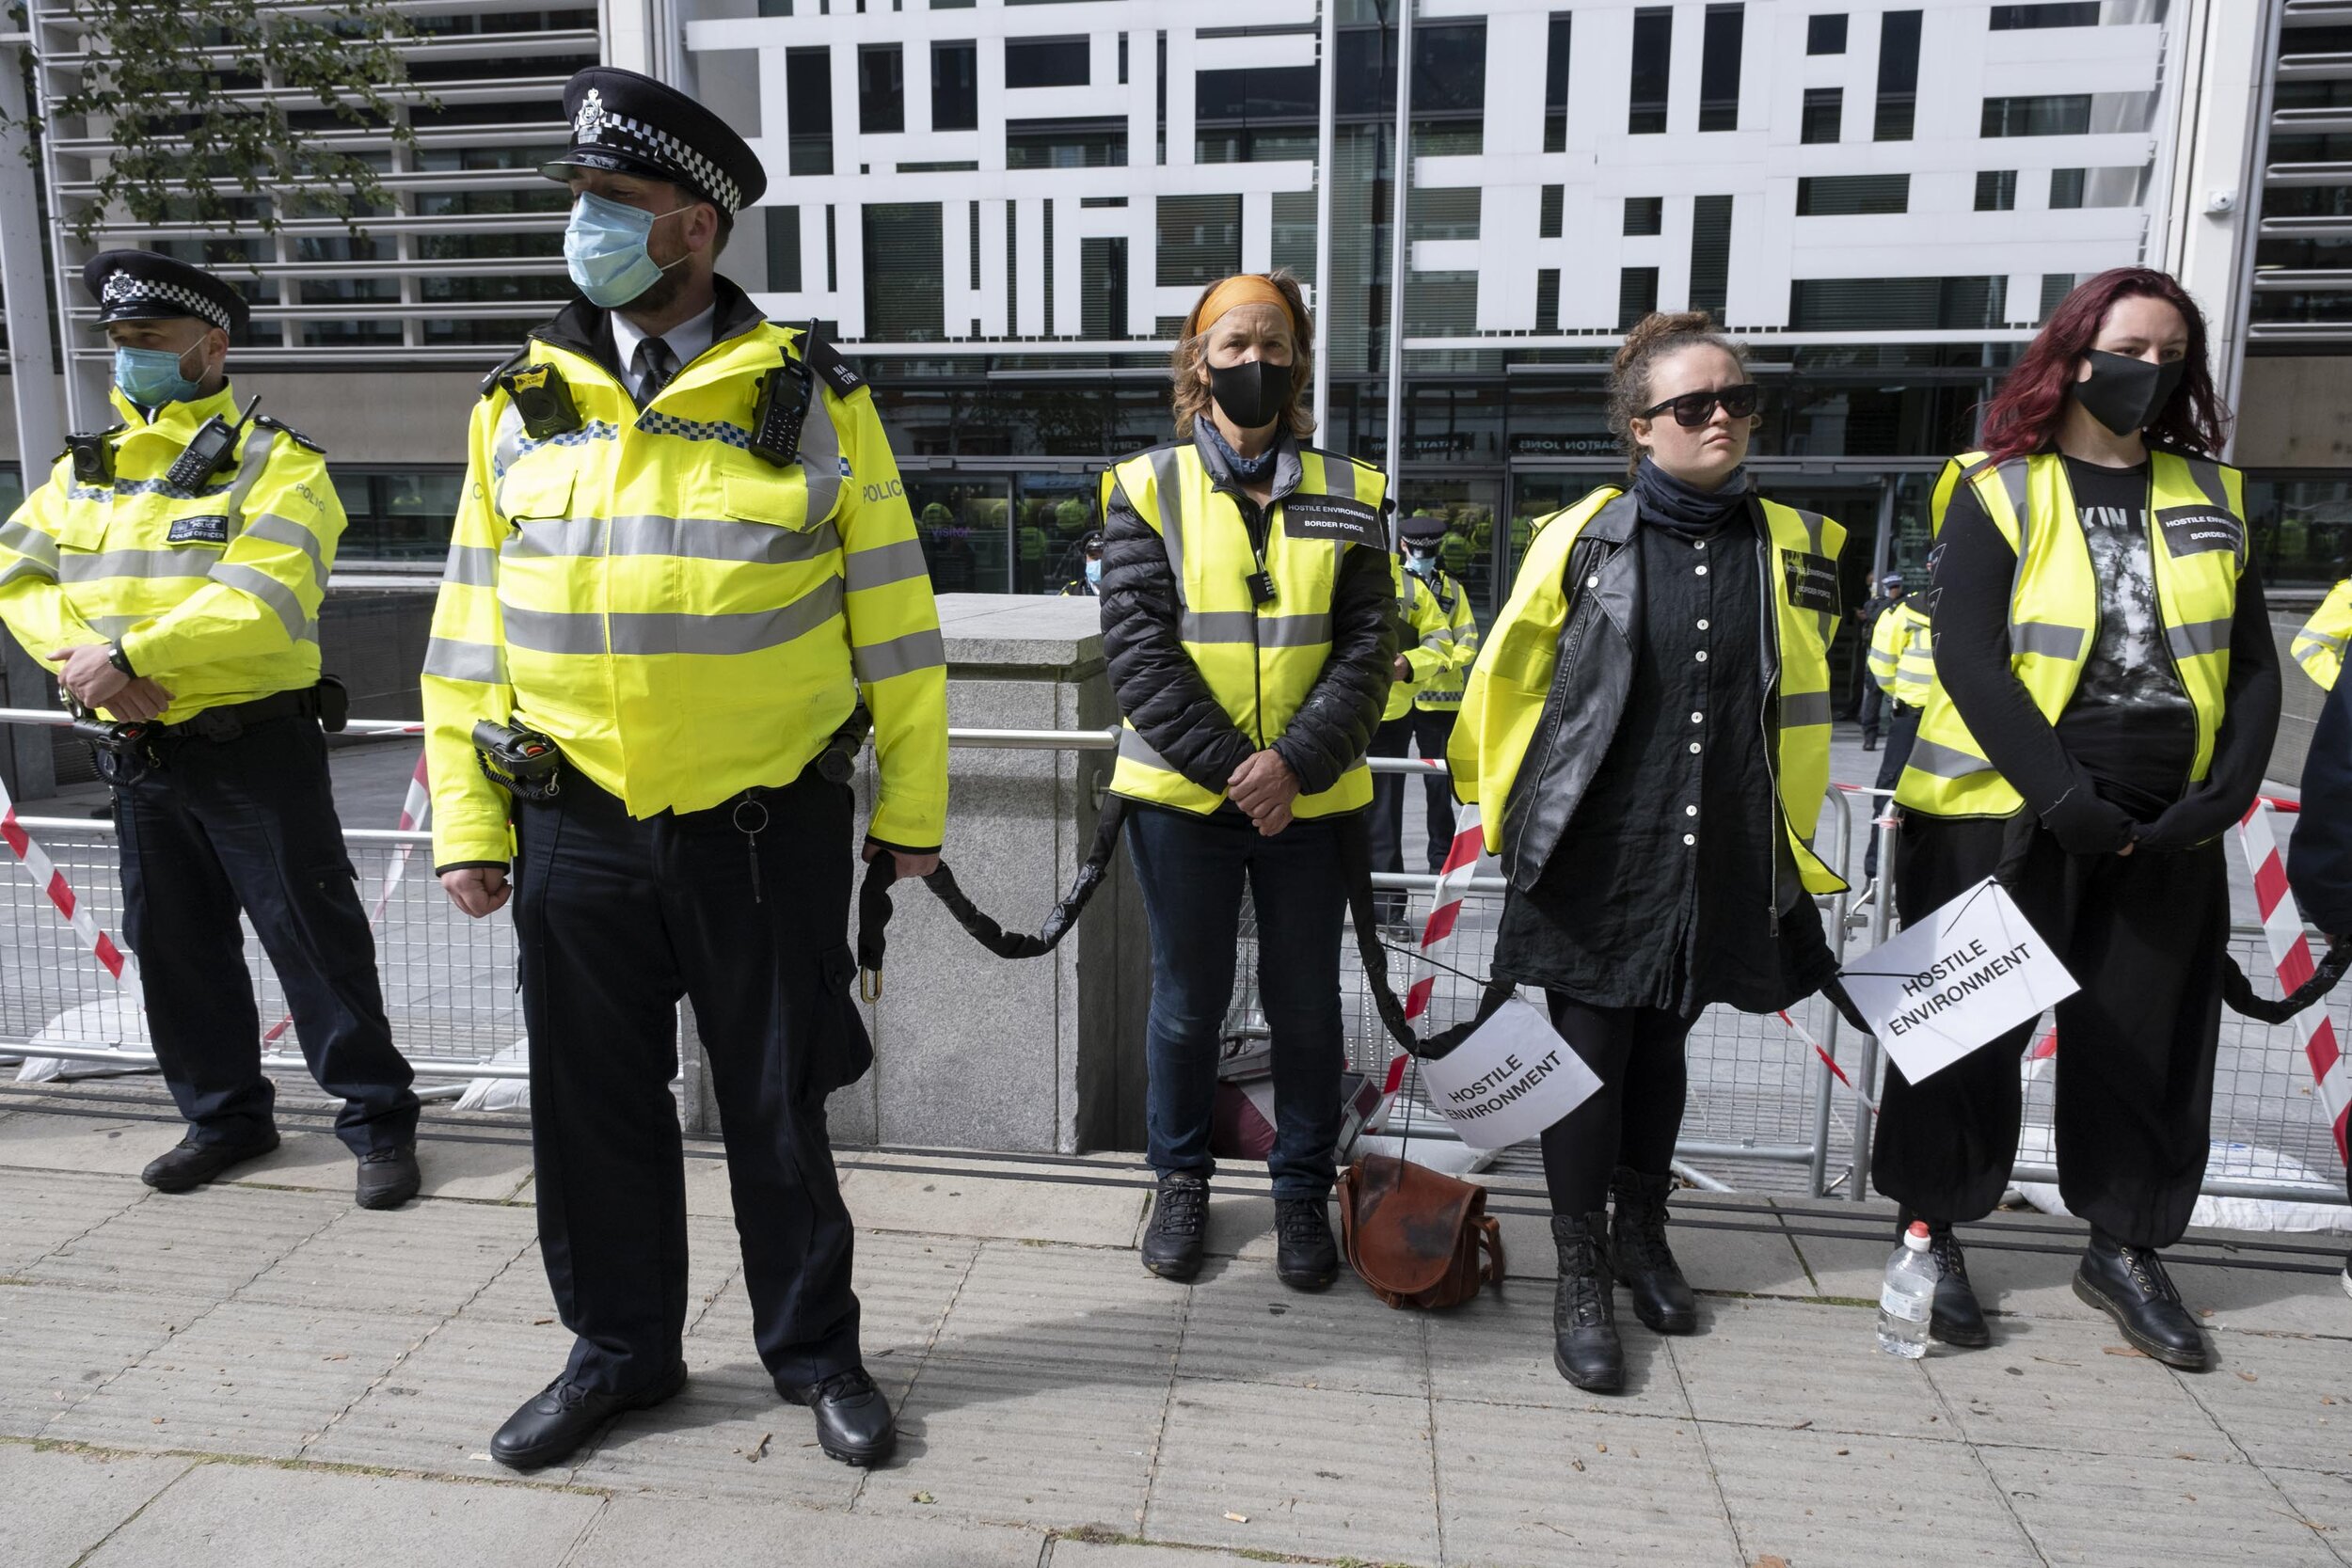  Climate justice protesters dressed as a 'Hostile Environment Border Force' chained together at a demonstration outside the Home Office in solidarity with migrants and those who suffer because of migration systems wordwide. 